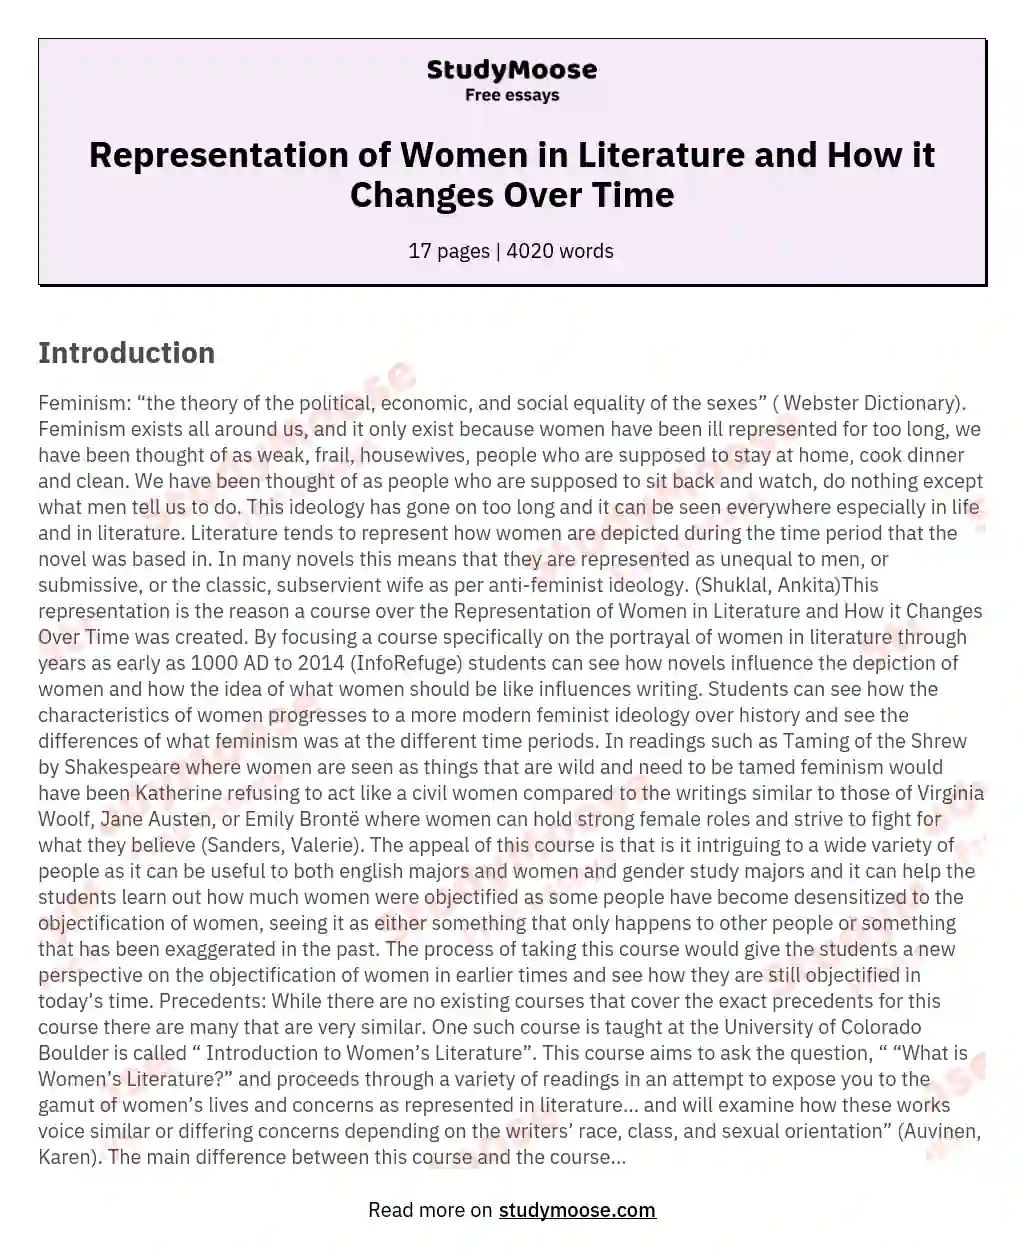 Representation of Women in Literature and How it Changes Over Time essay